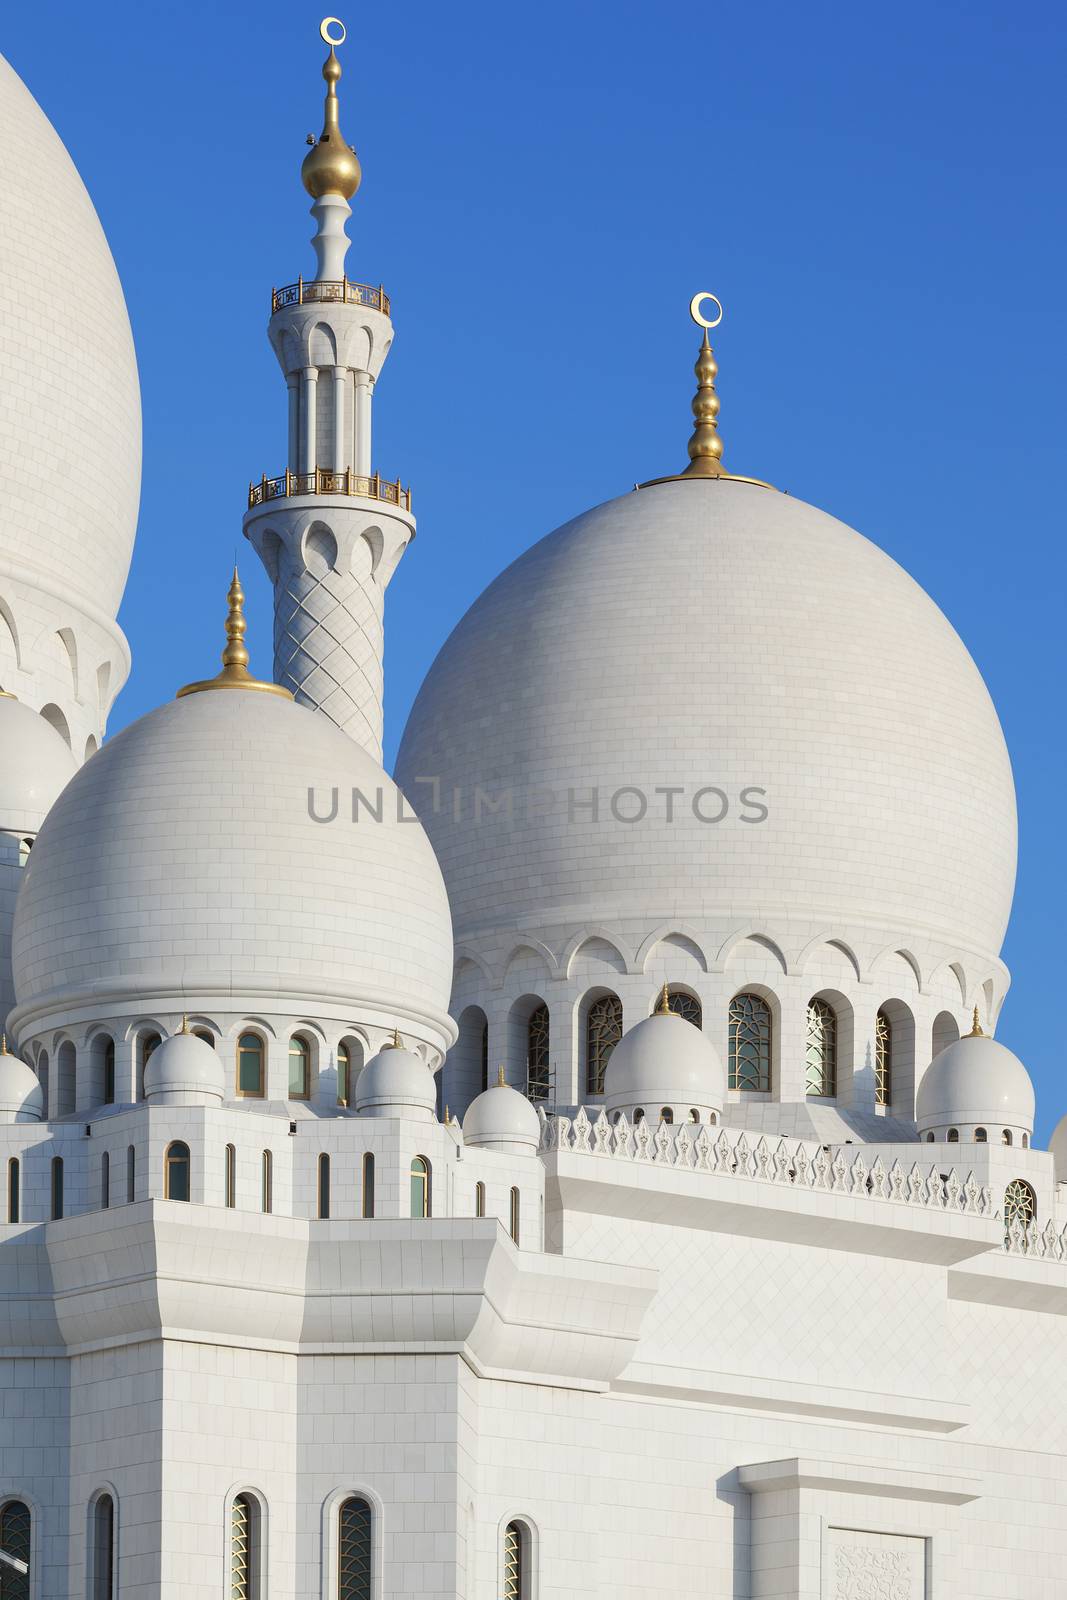 Part of Sheikh Zayed Grand Mosque by vwalakte